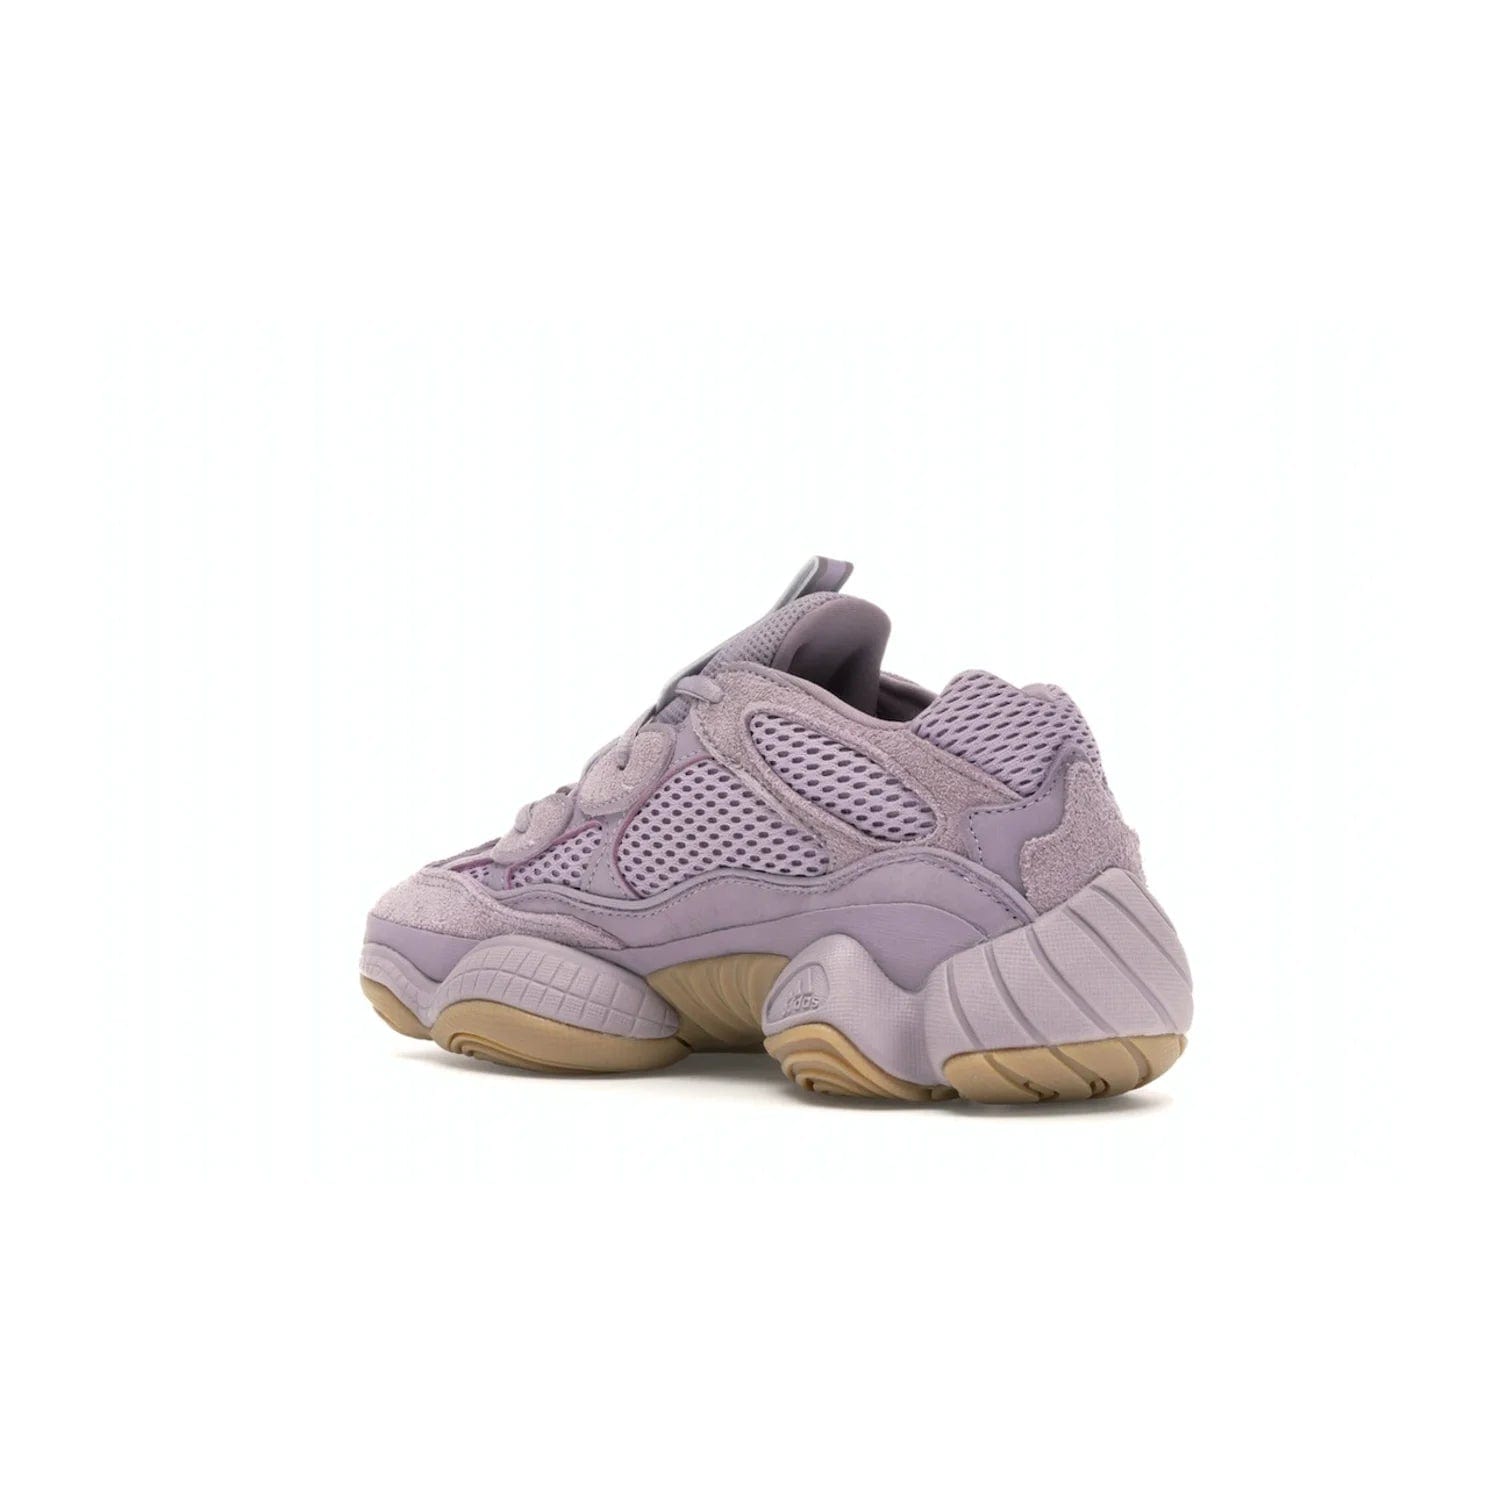 adidas Yeezy 500 Soft Vision - Image 23 - Only at www.BallersClubKickz.com - New adidas Yeezy 500 Soft Vision sneaker featuring a combination of mesh, leather, and suede in a classic Soft Vision colorway. Gum rubber outsole ensures durability and traction. An everyday sneaker that stands out from the crowd.